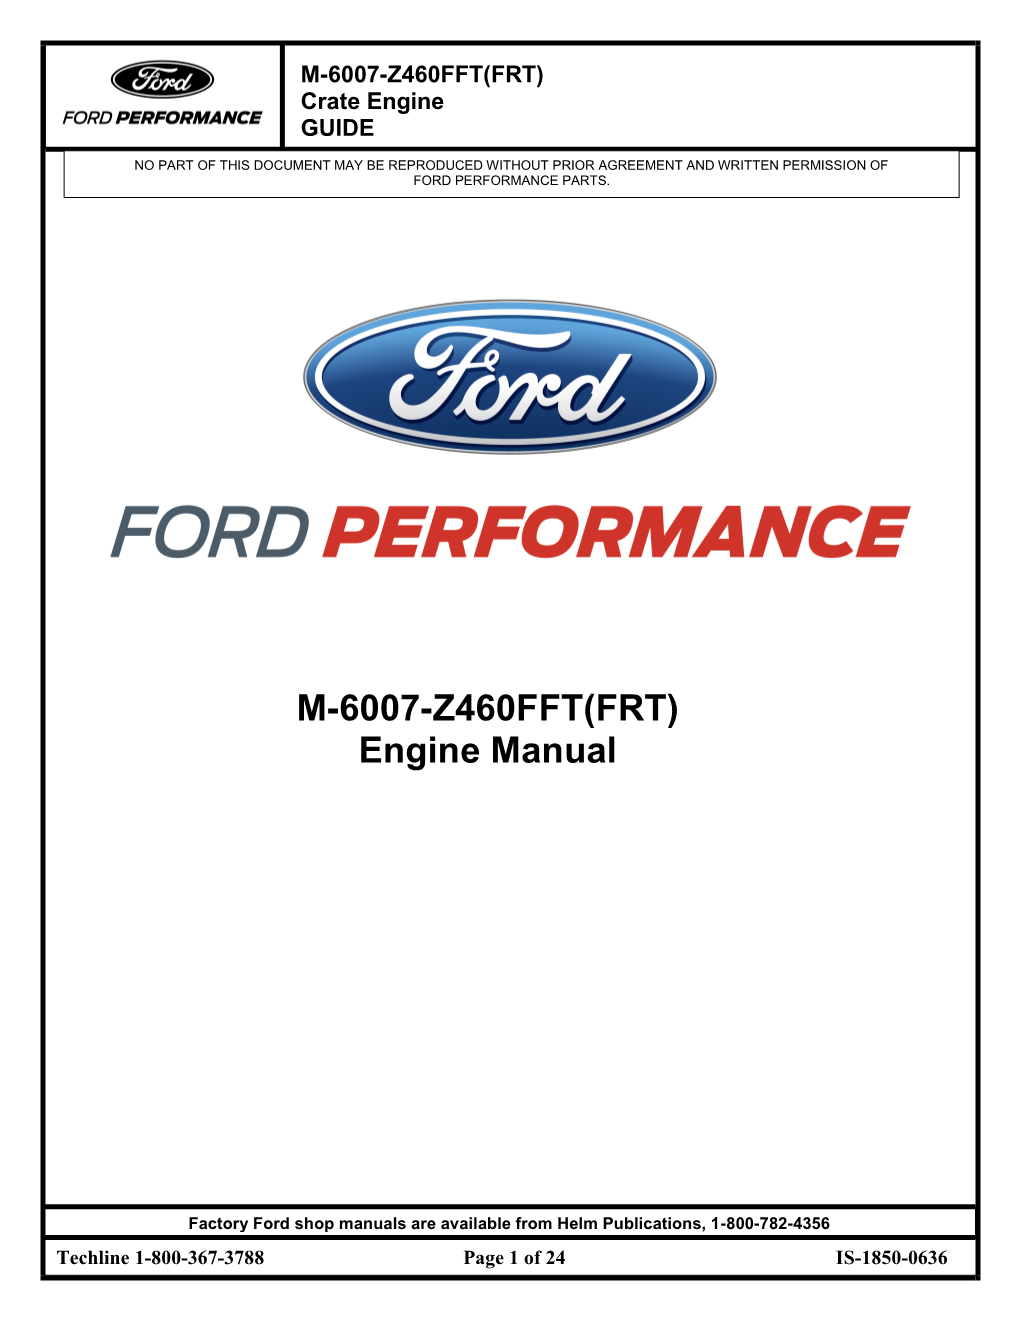 M-6007-Z460FFT(FRT) Crate Engine GUIDE